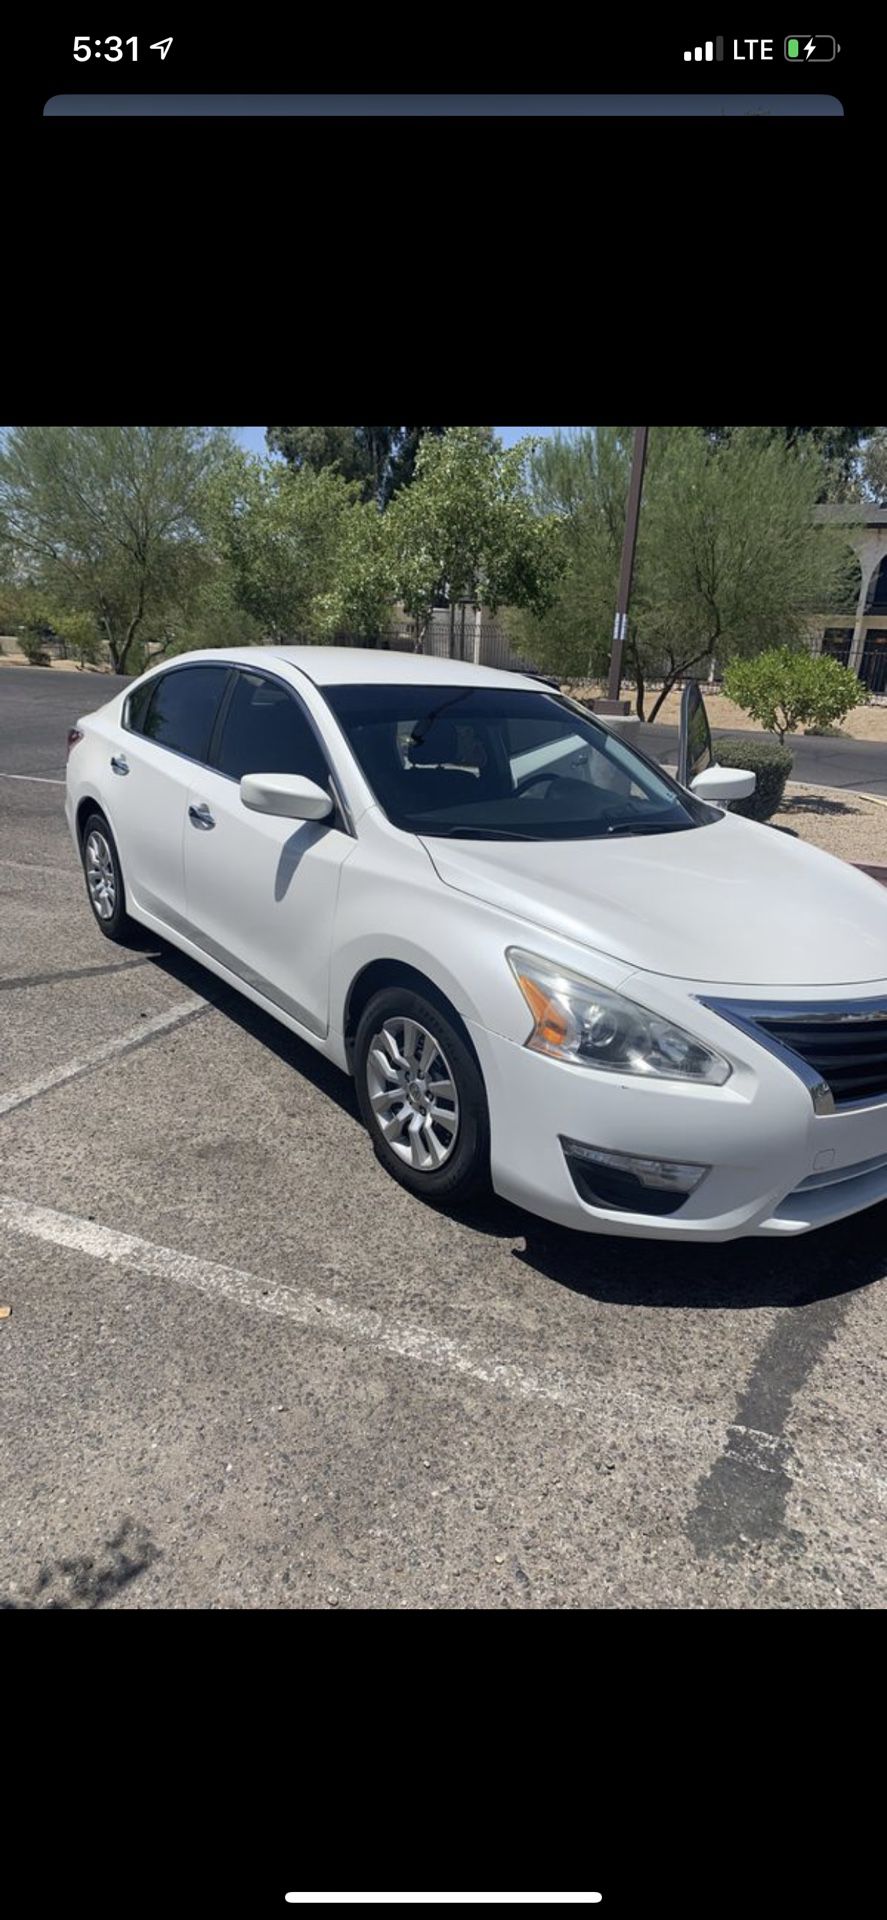 Hello I’m selling my 2013 Nissan Altima 2.5 S model car is a pearl white not white has no mechanical issues at all plates current for 2 yrs and emisi